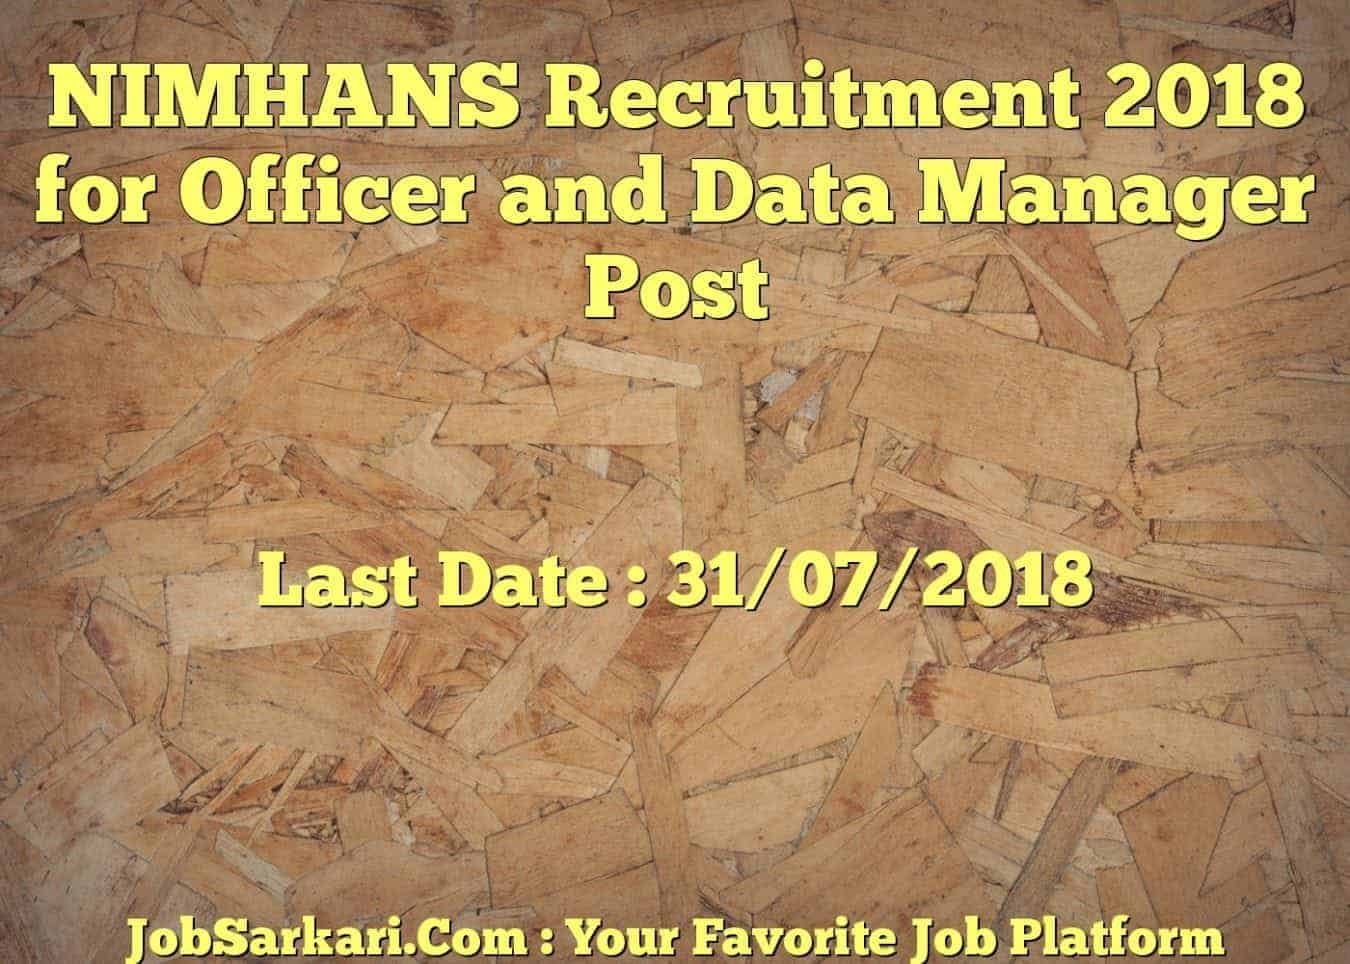 NIMHANS Recruitment 2018 for Officer and Data Manager Post